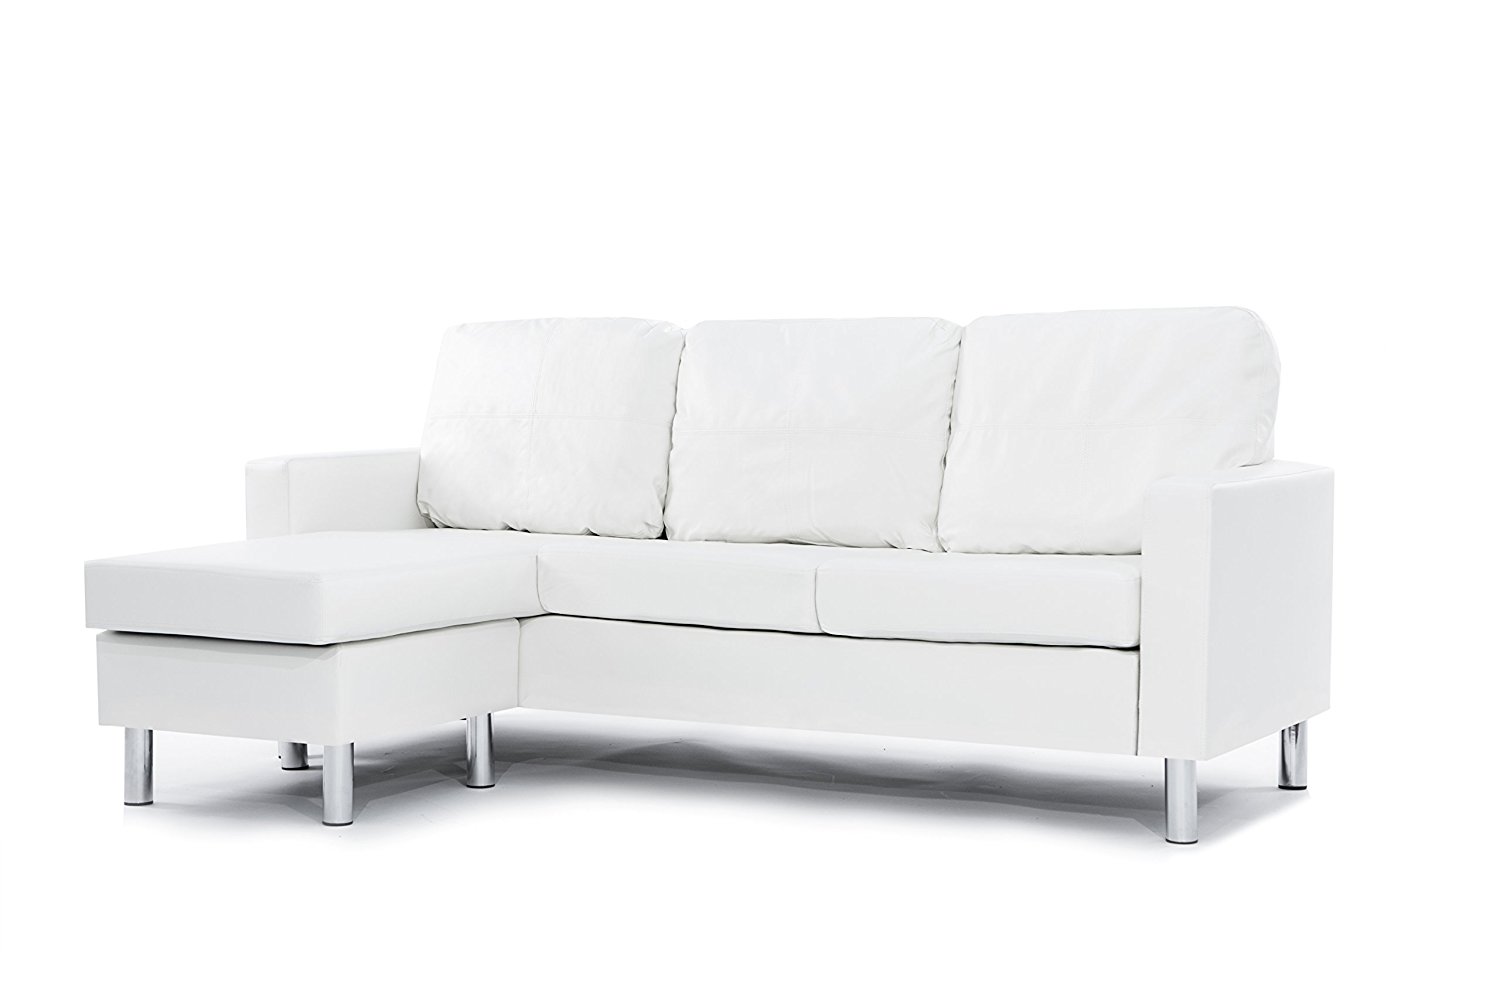 Modern Bonded Leather Sectional Sofa - Small Space Configurable Couch - White